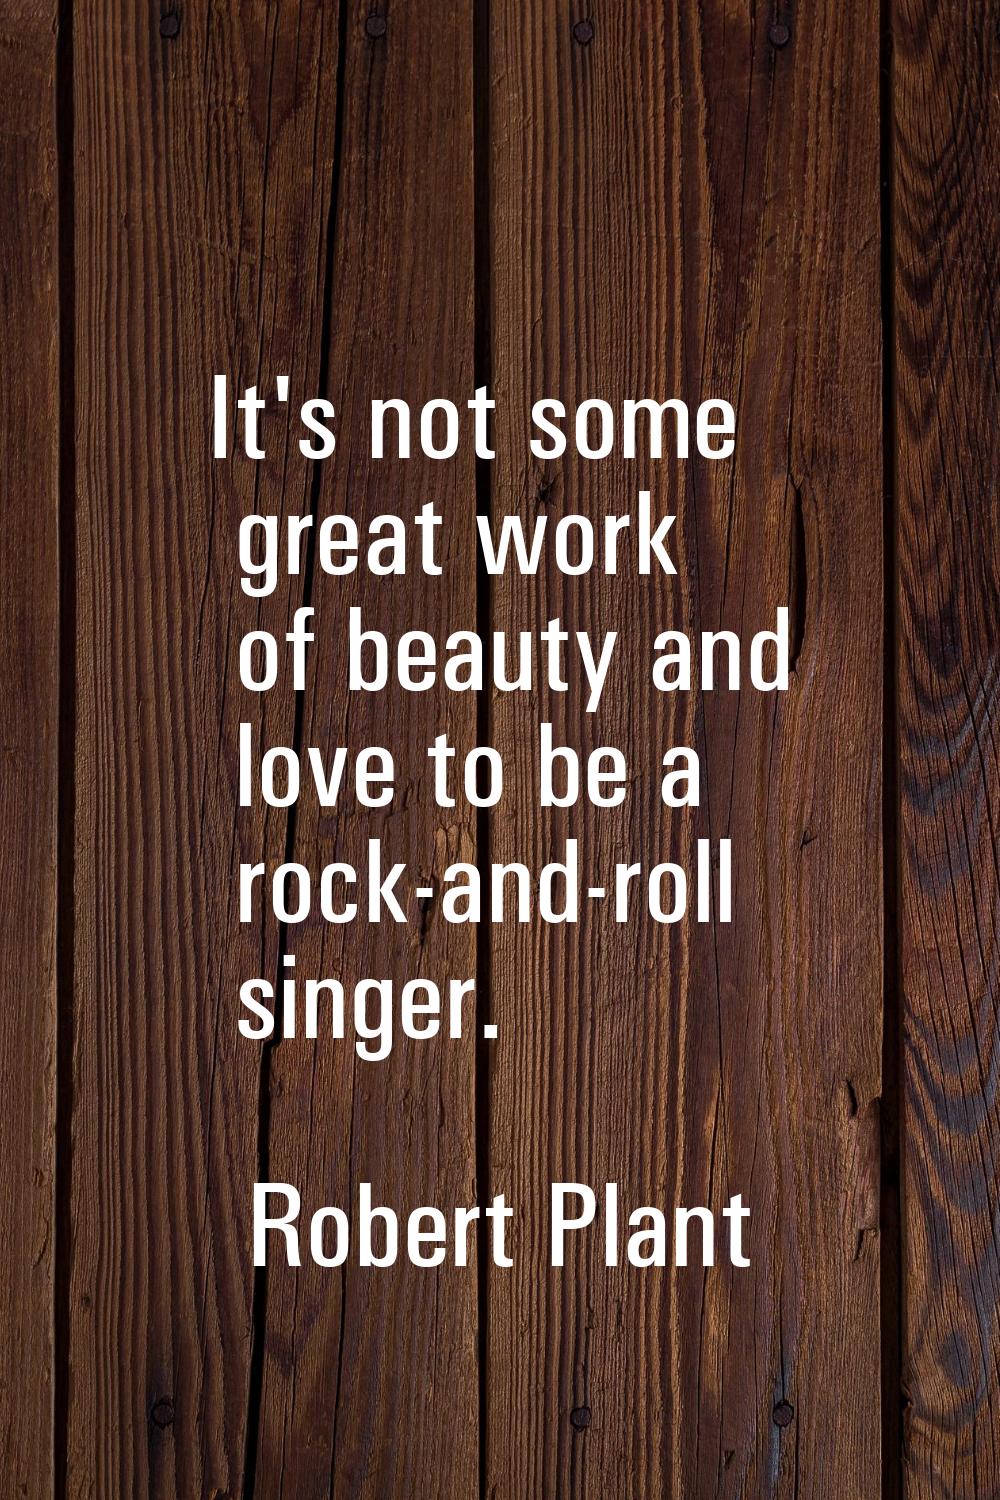 It's not some great work of beauty and love to be a rock-and-roll singer.